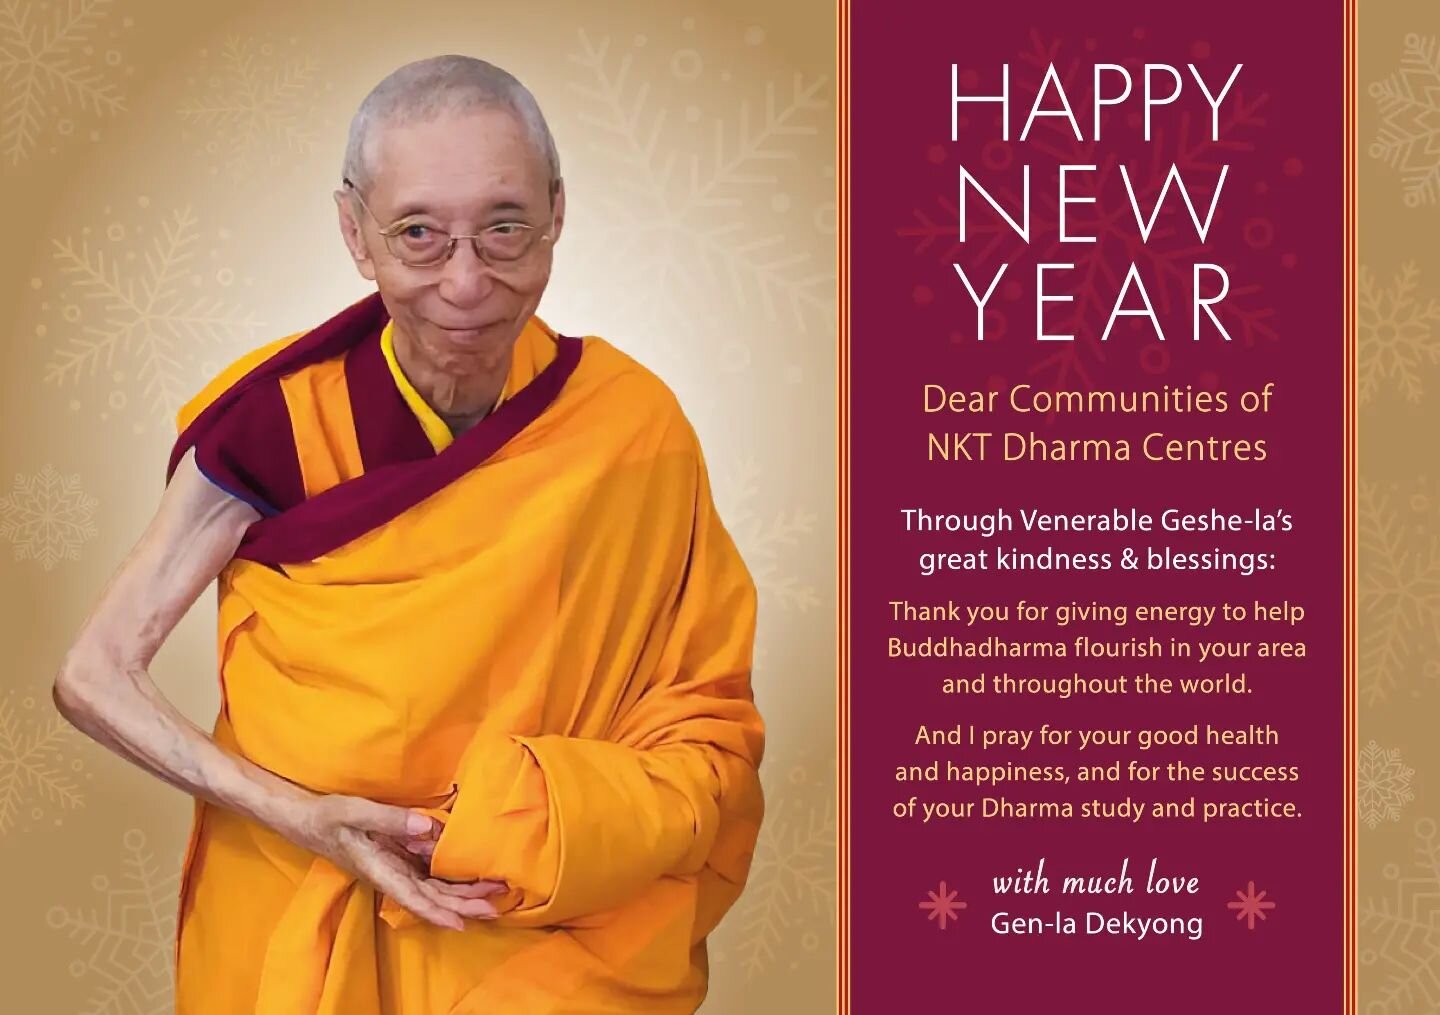 lNew Years wishes from Gen-la Dekyong.

HAPPY NEW YEAR

Dear communities of NKT Dharma centers. 
Through Venerable Geshe-la's  great kindness and blessings:

Thank you for giving energy to help  Buddhadharma flourish in your area and throughout the w